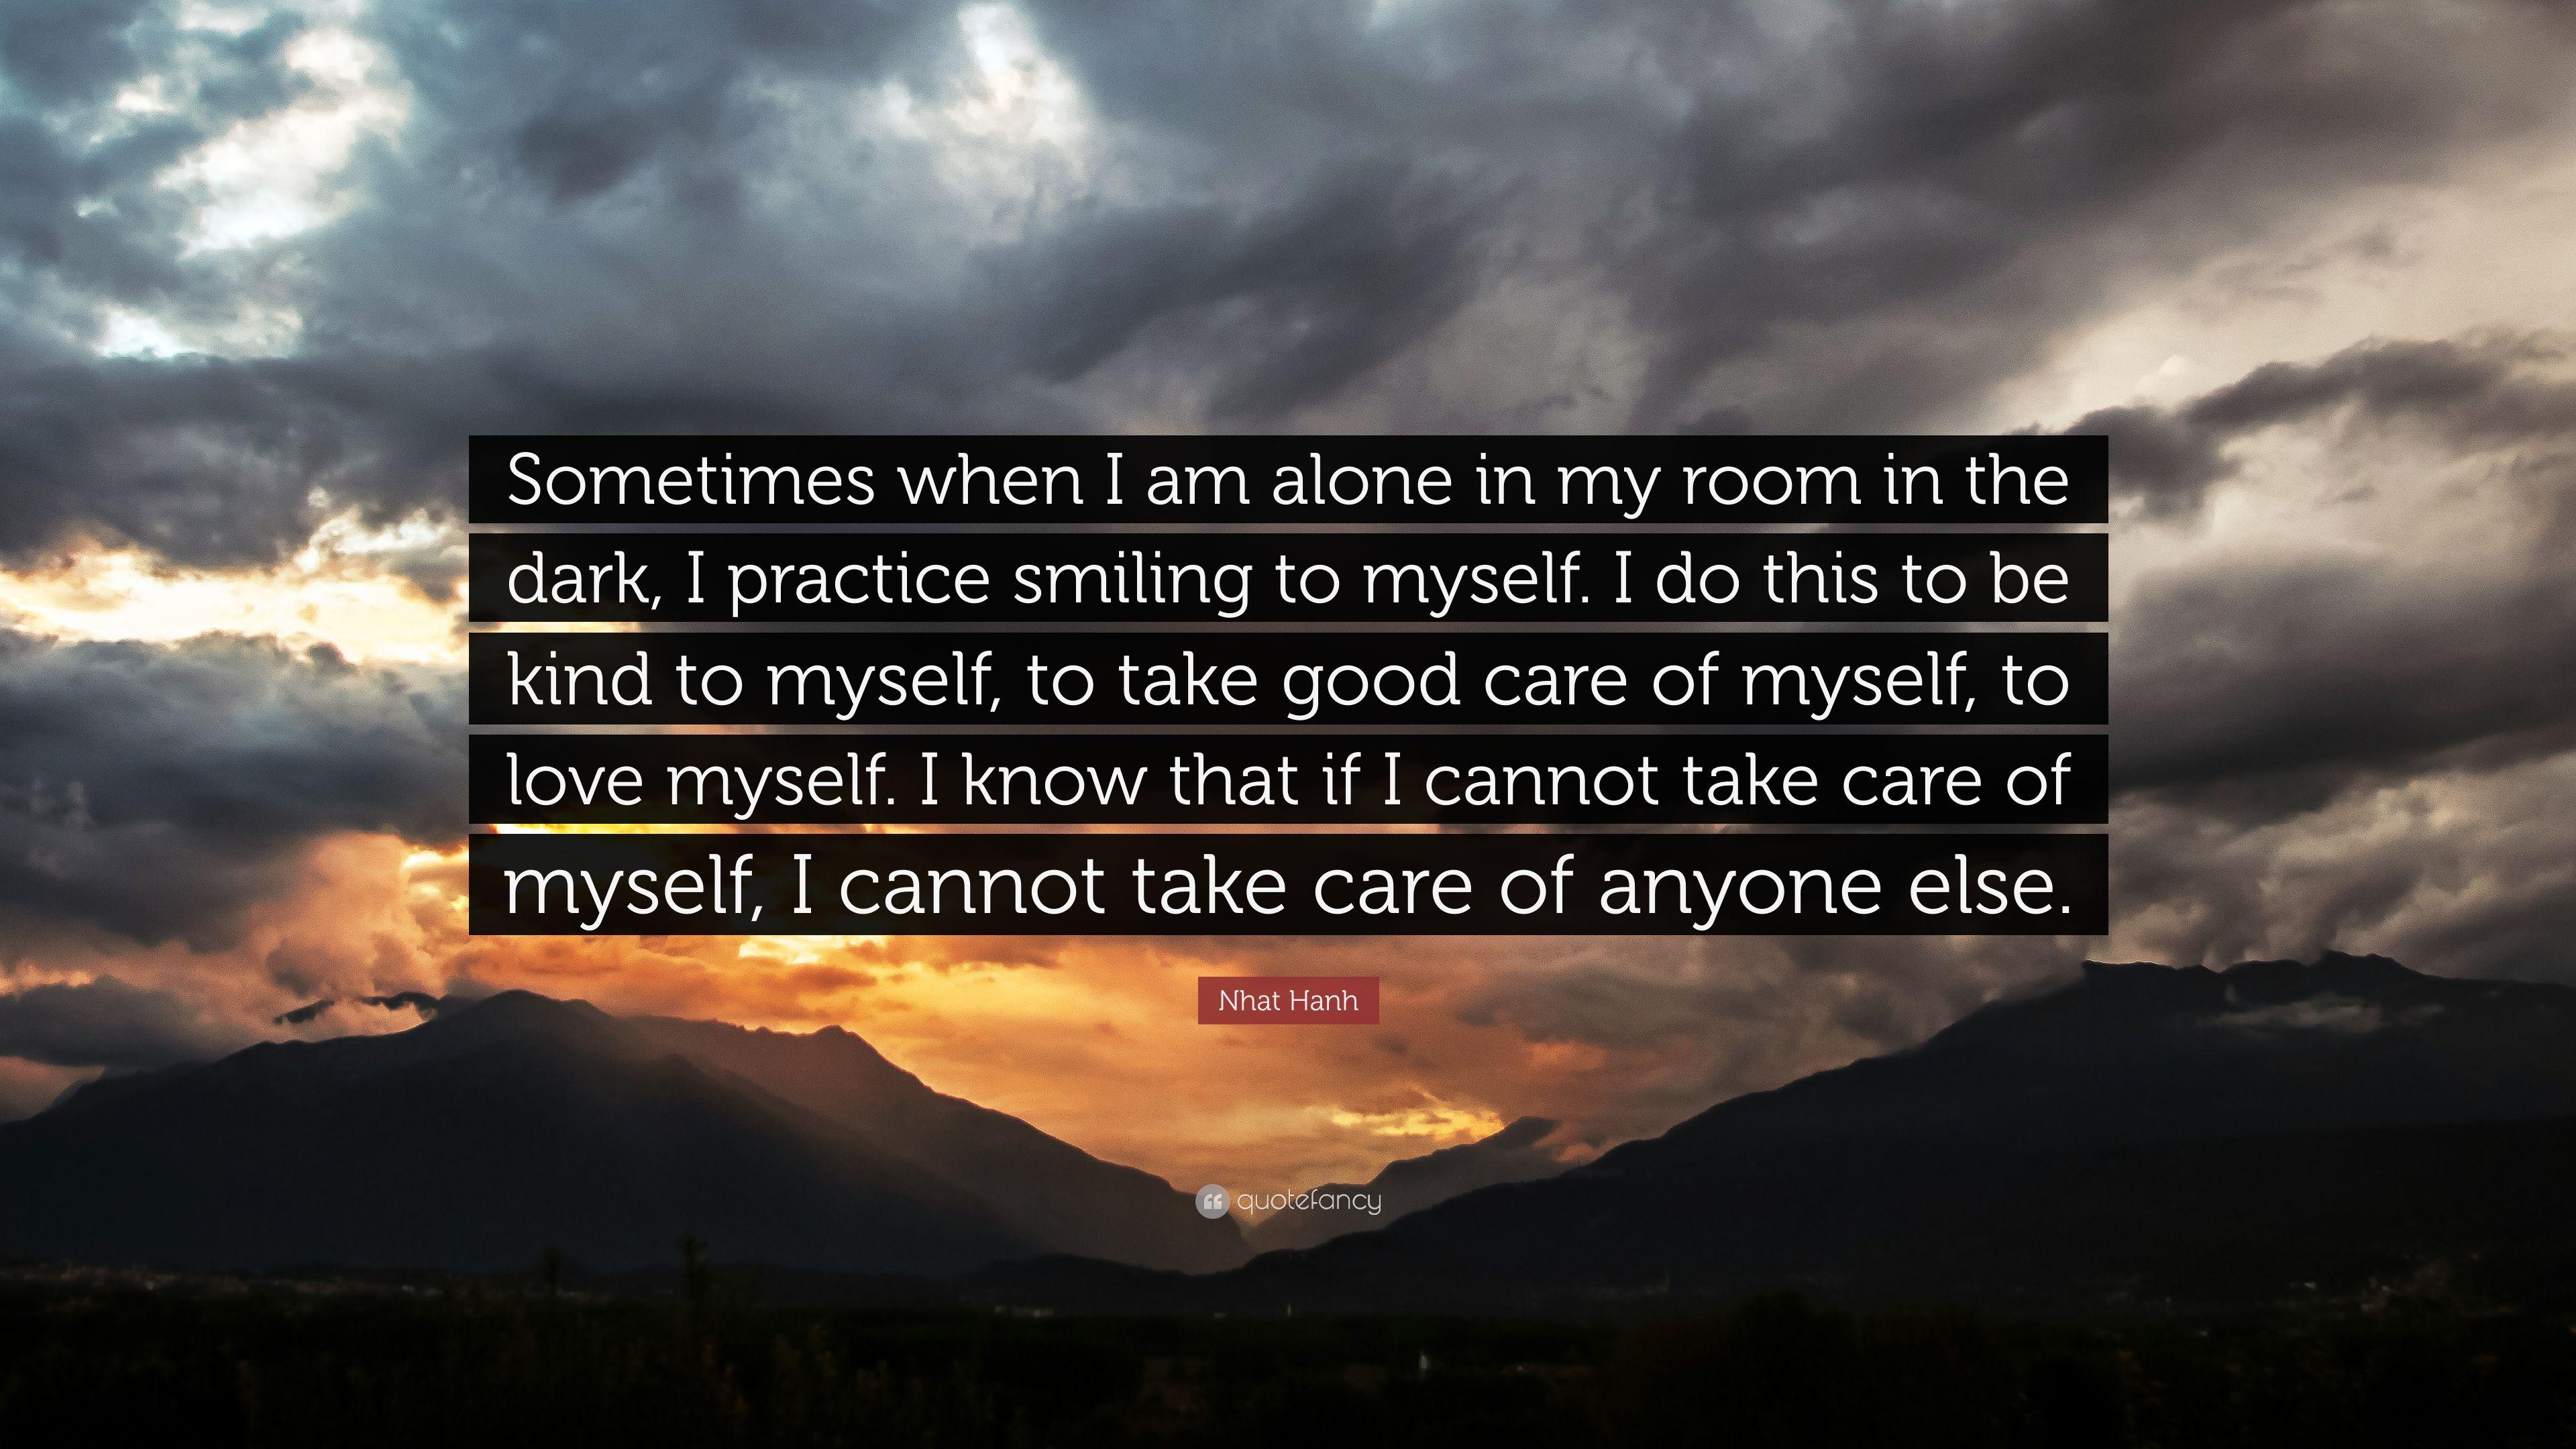 Nhat Hanh Quote: “Sometimes when I am alone in my room in the dark